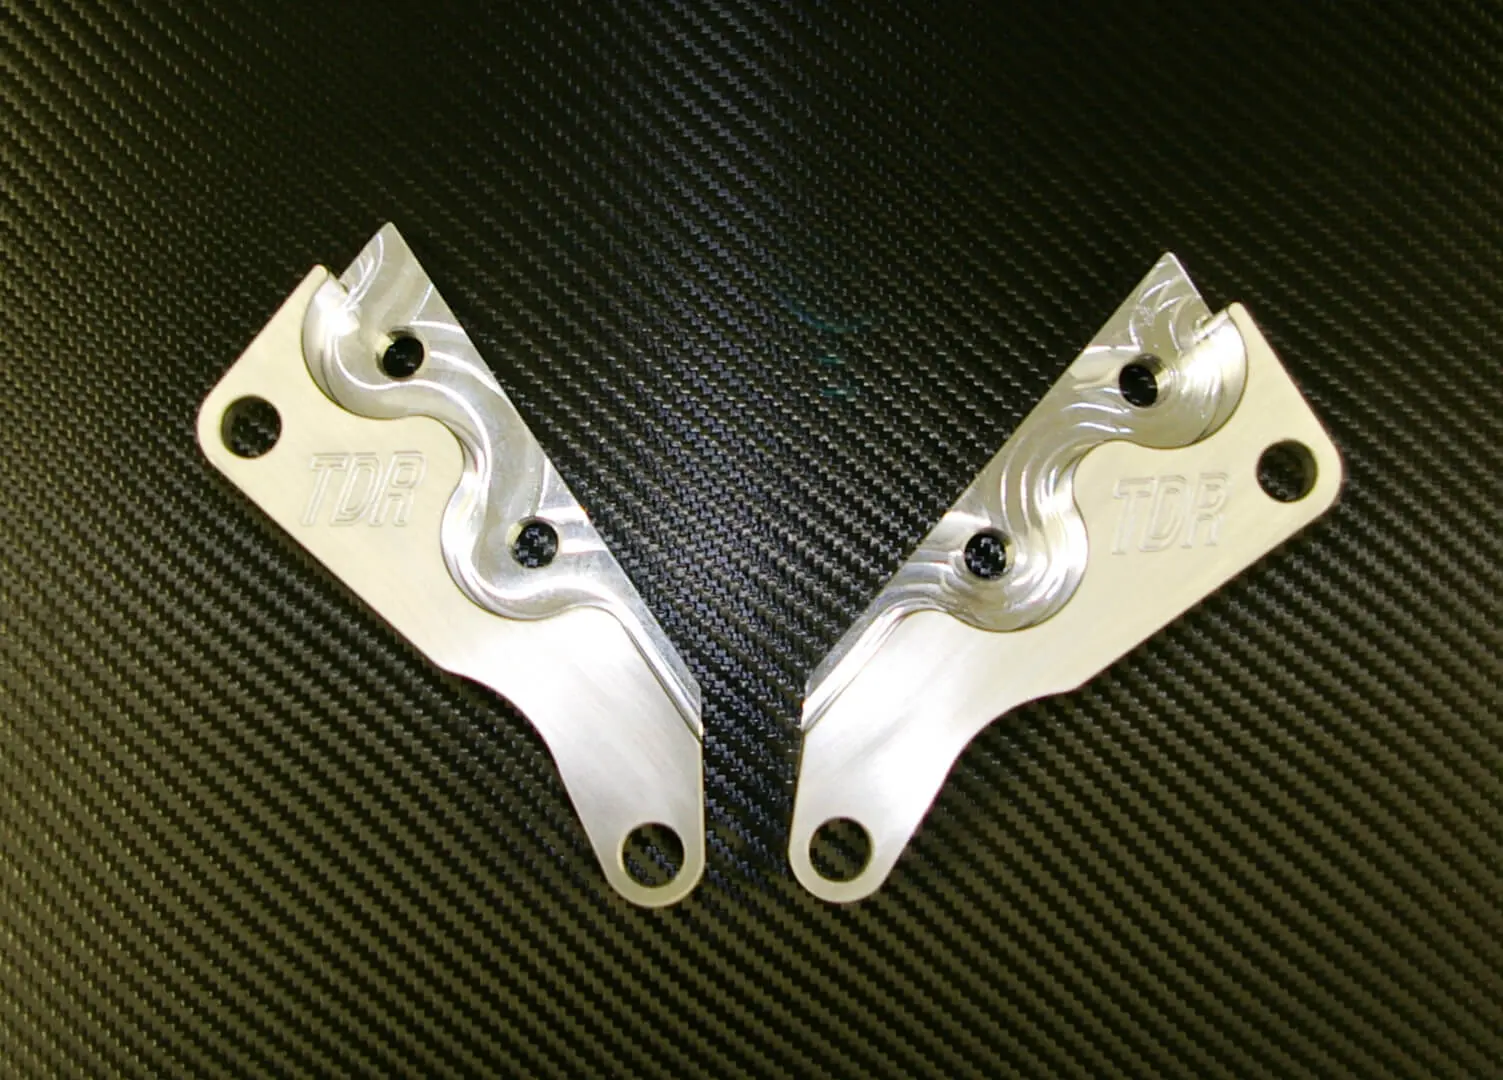 A pair of silver metal parts on top of a black surface.